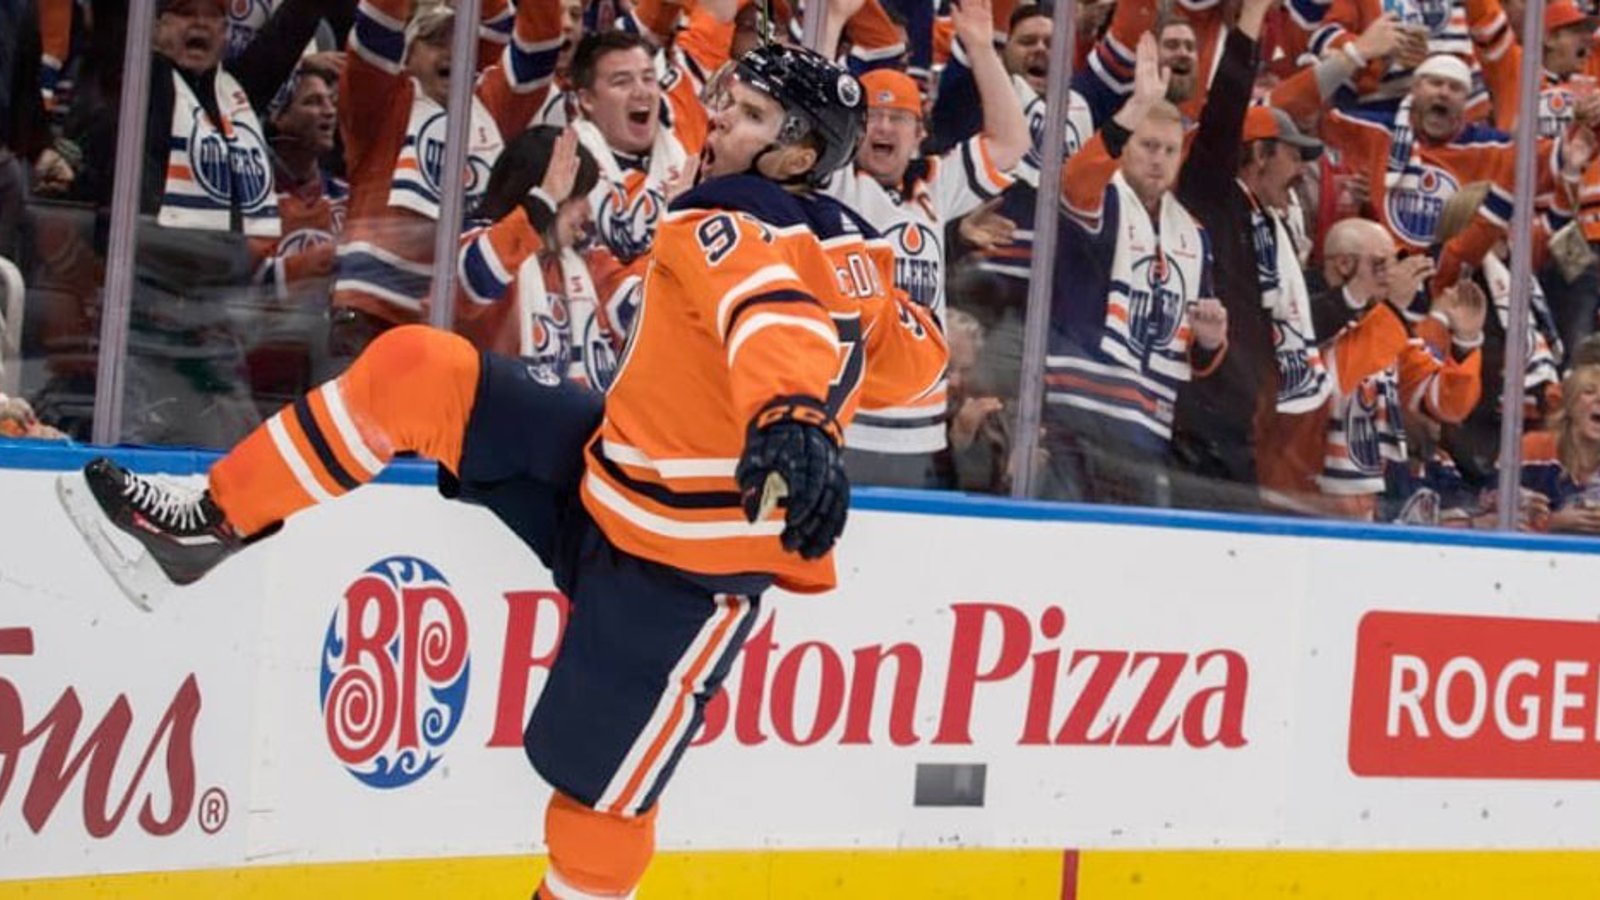 McDavid dazzles with a highlight reel goal to put the Oilers up late in the third period